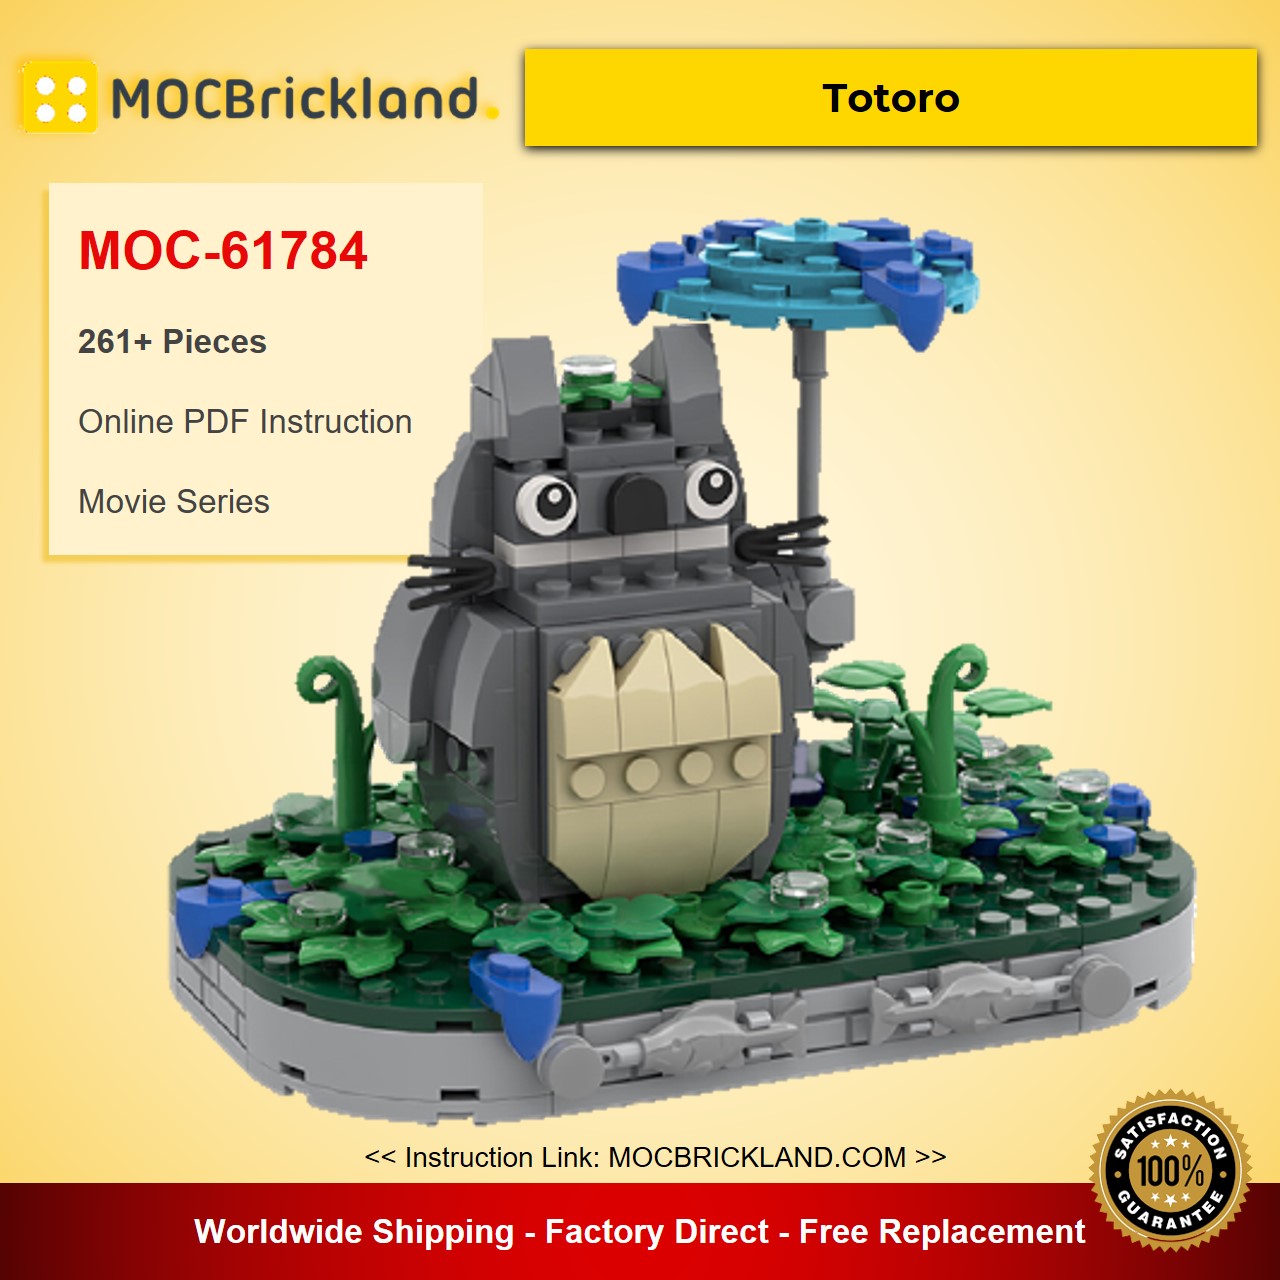 Totoro MOC-61784 Movie Designed By Superesc With 261 Pieces 